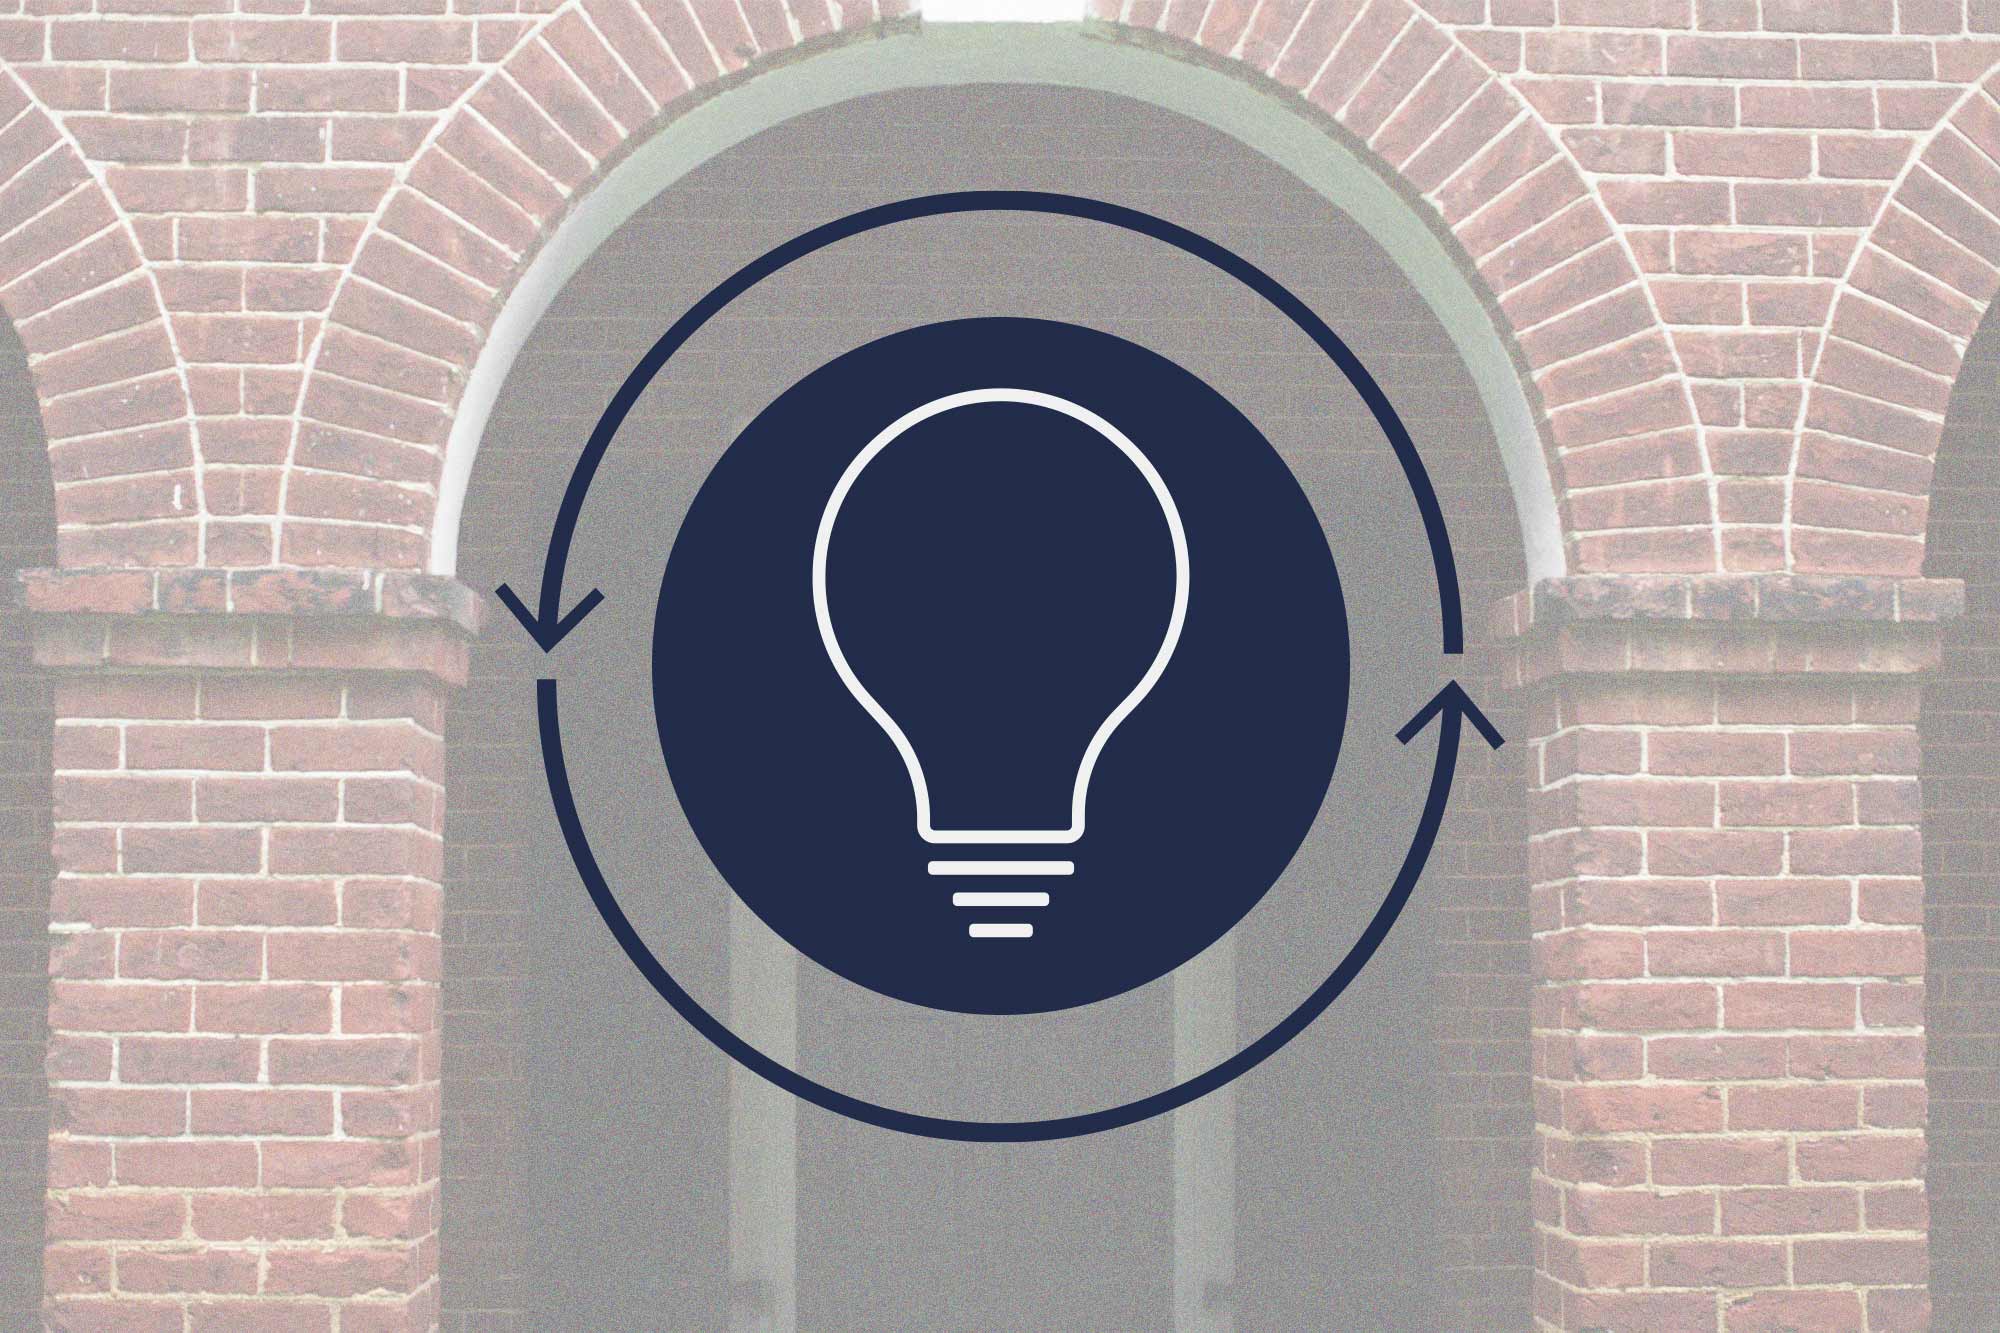 lightbulb with arrows in circle around it; building arches in background